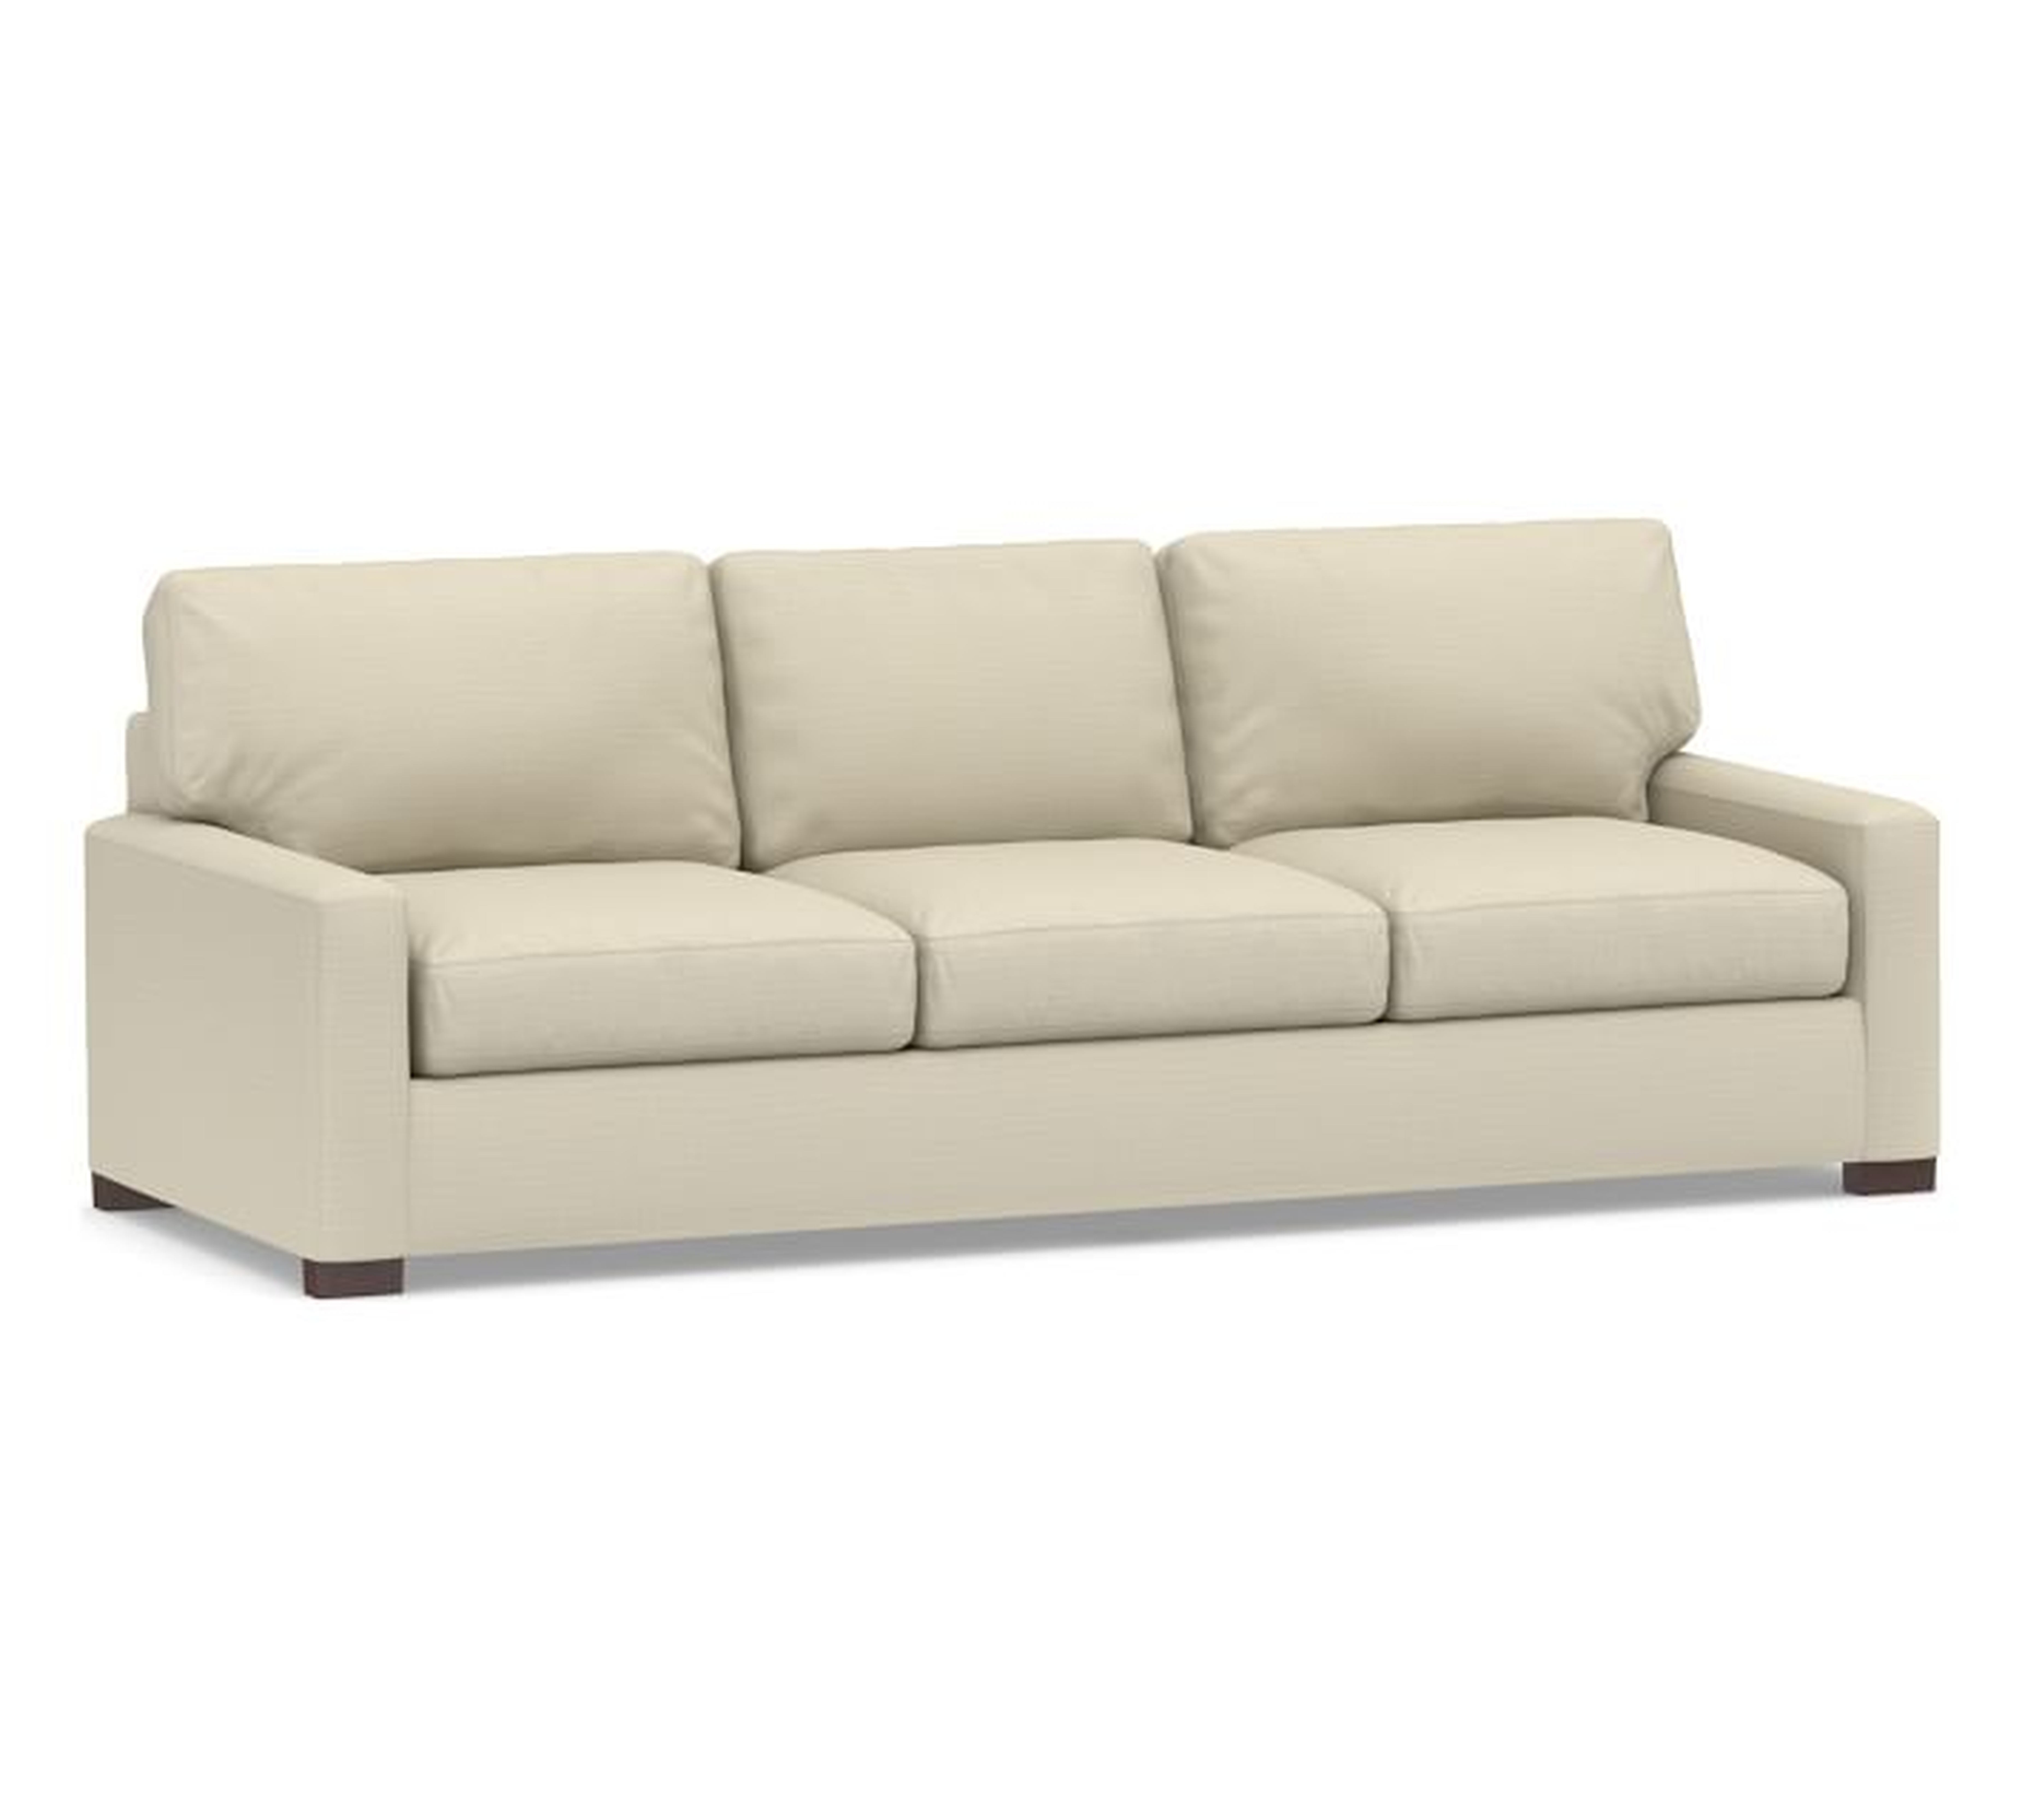 Turner Square Arm Upholstered Grand Sofa 105" without Nailheads, Down Blend Wrapped Cushions, Performance Everydaylinen(TM) by Crypton(R) Stone - Pottery Barn